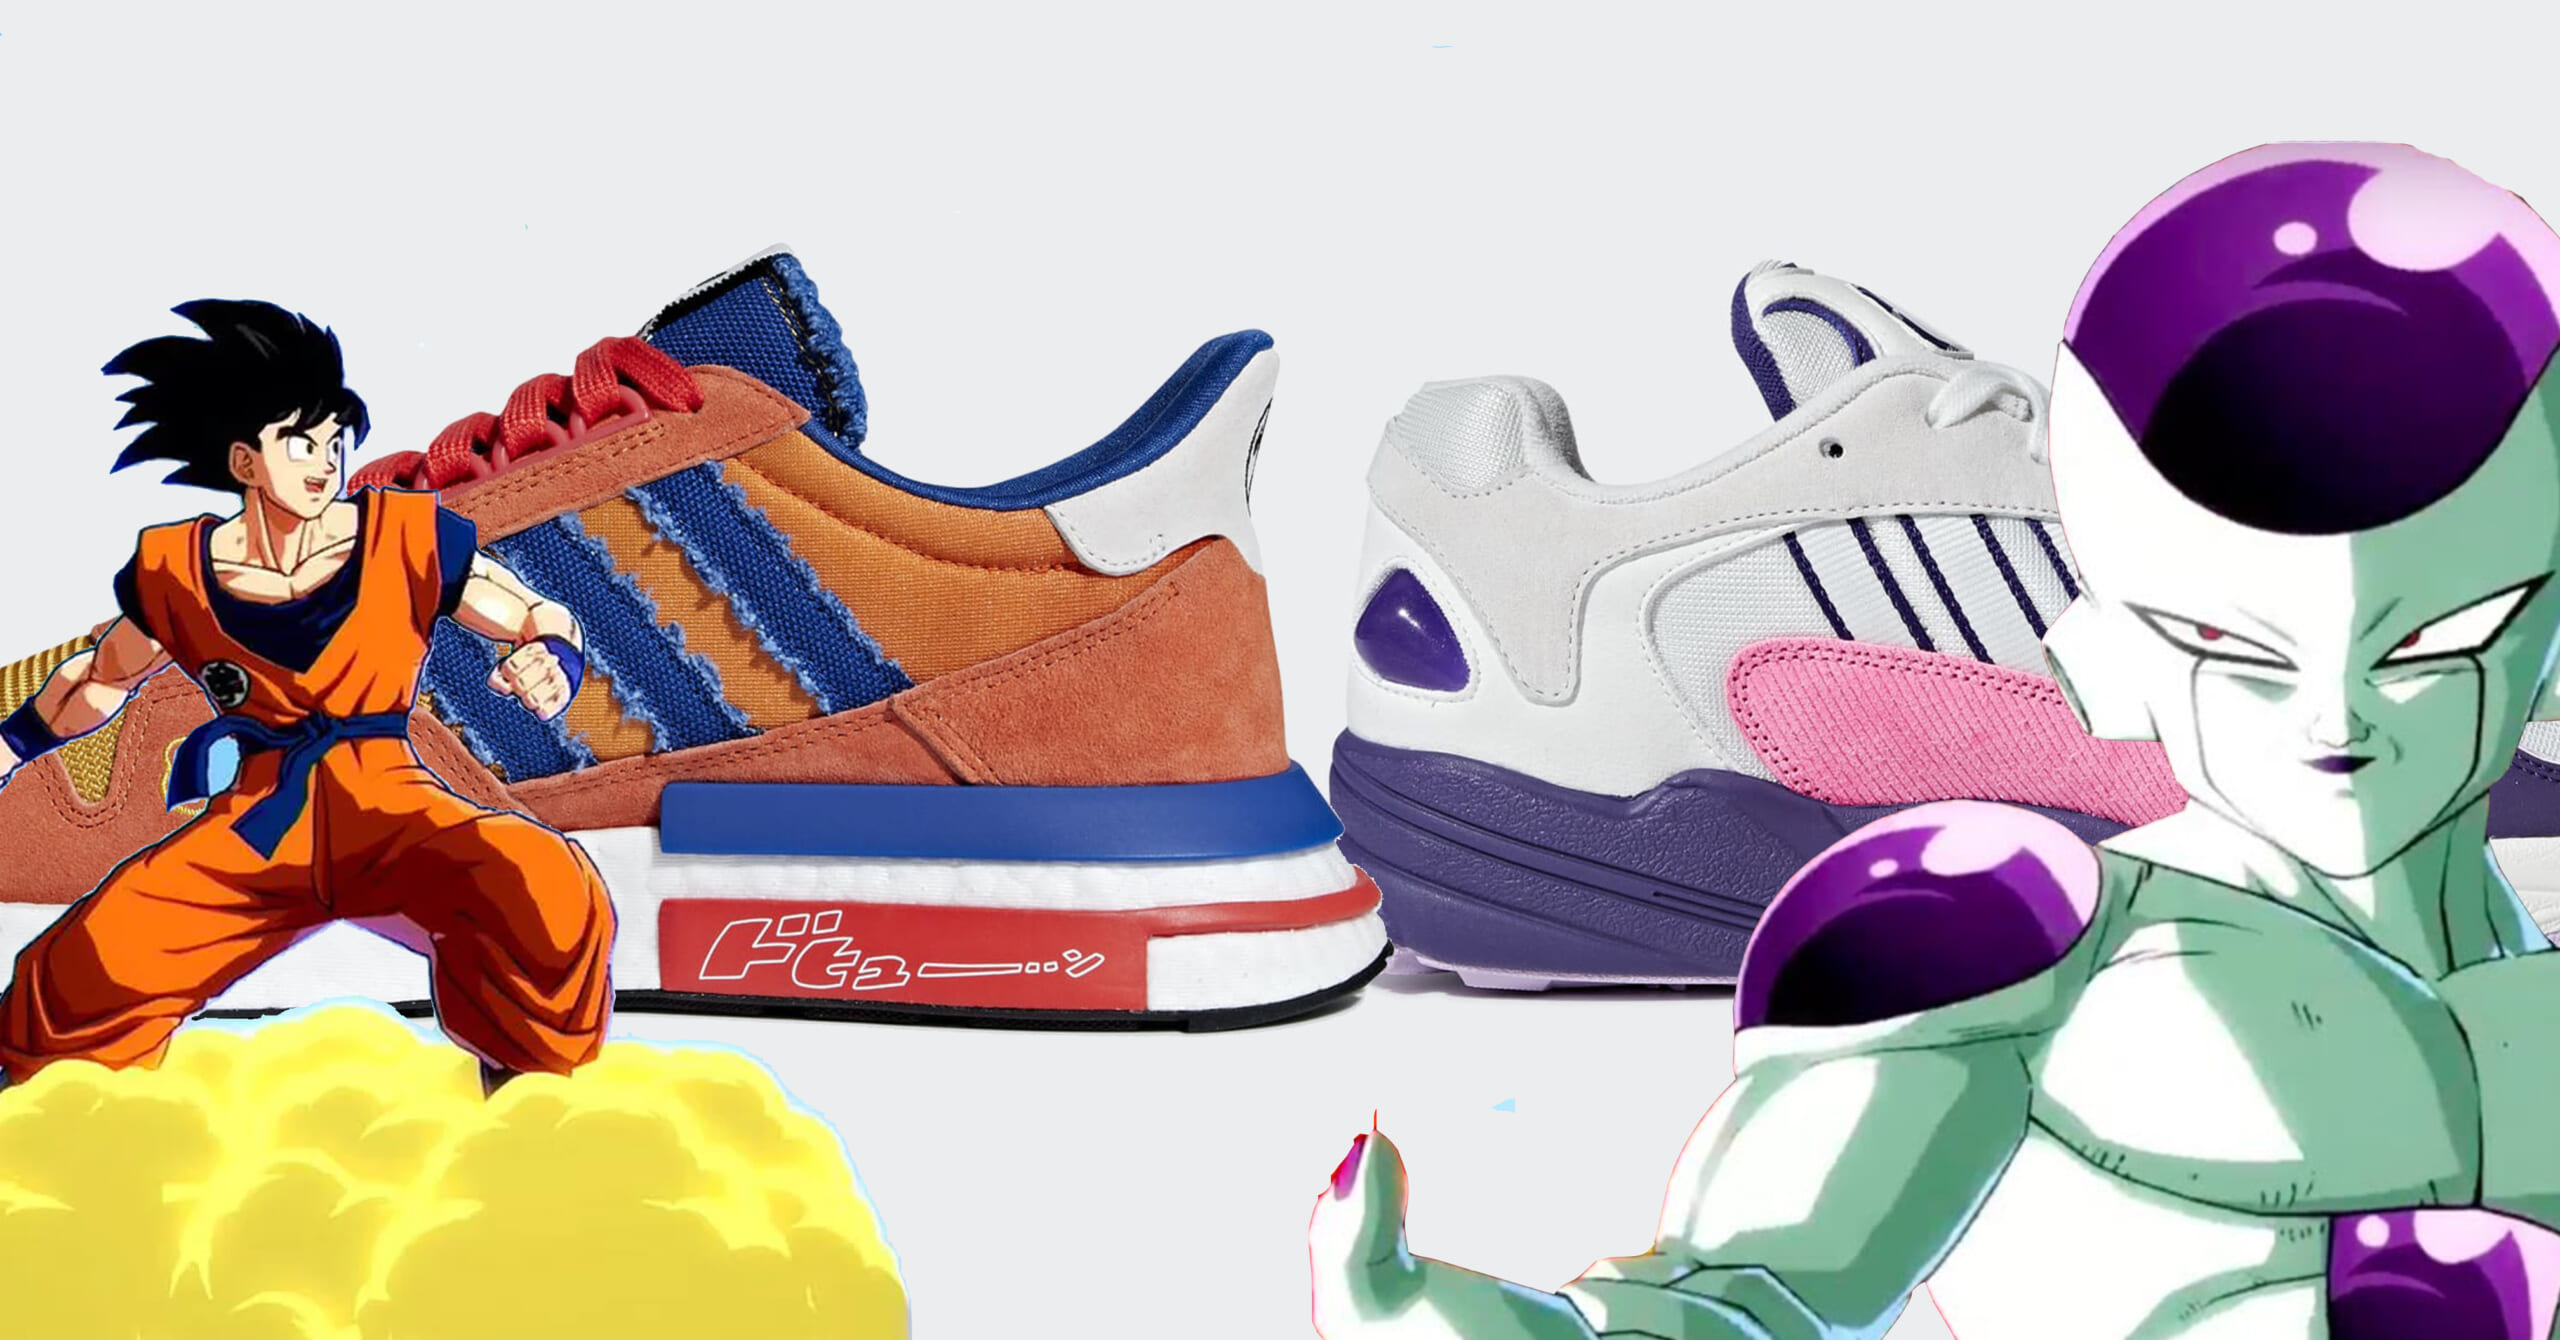 Dragon Z Adidas Sneakers Are Finally Here -